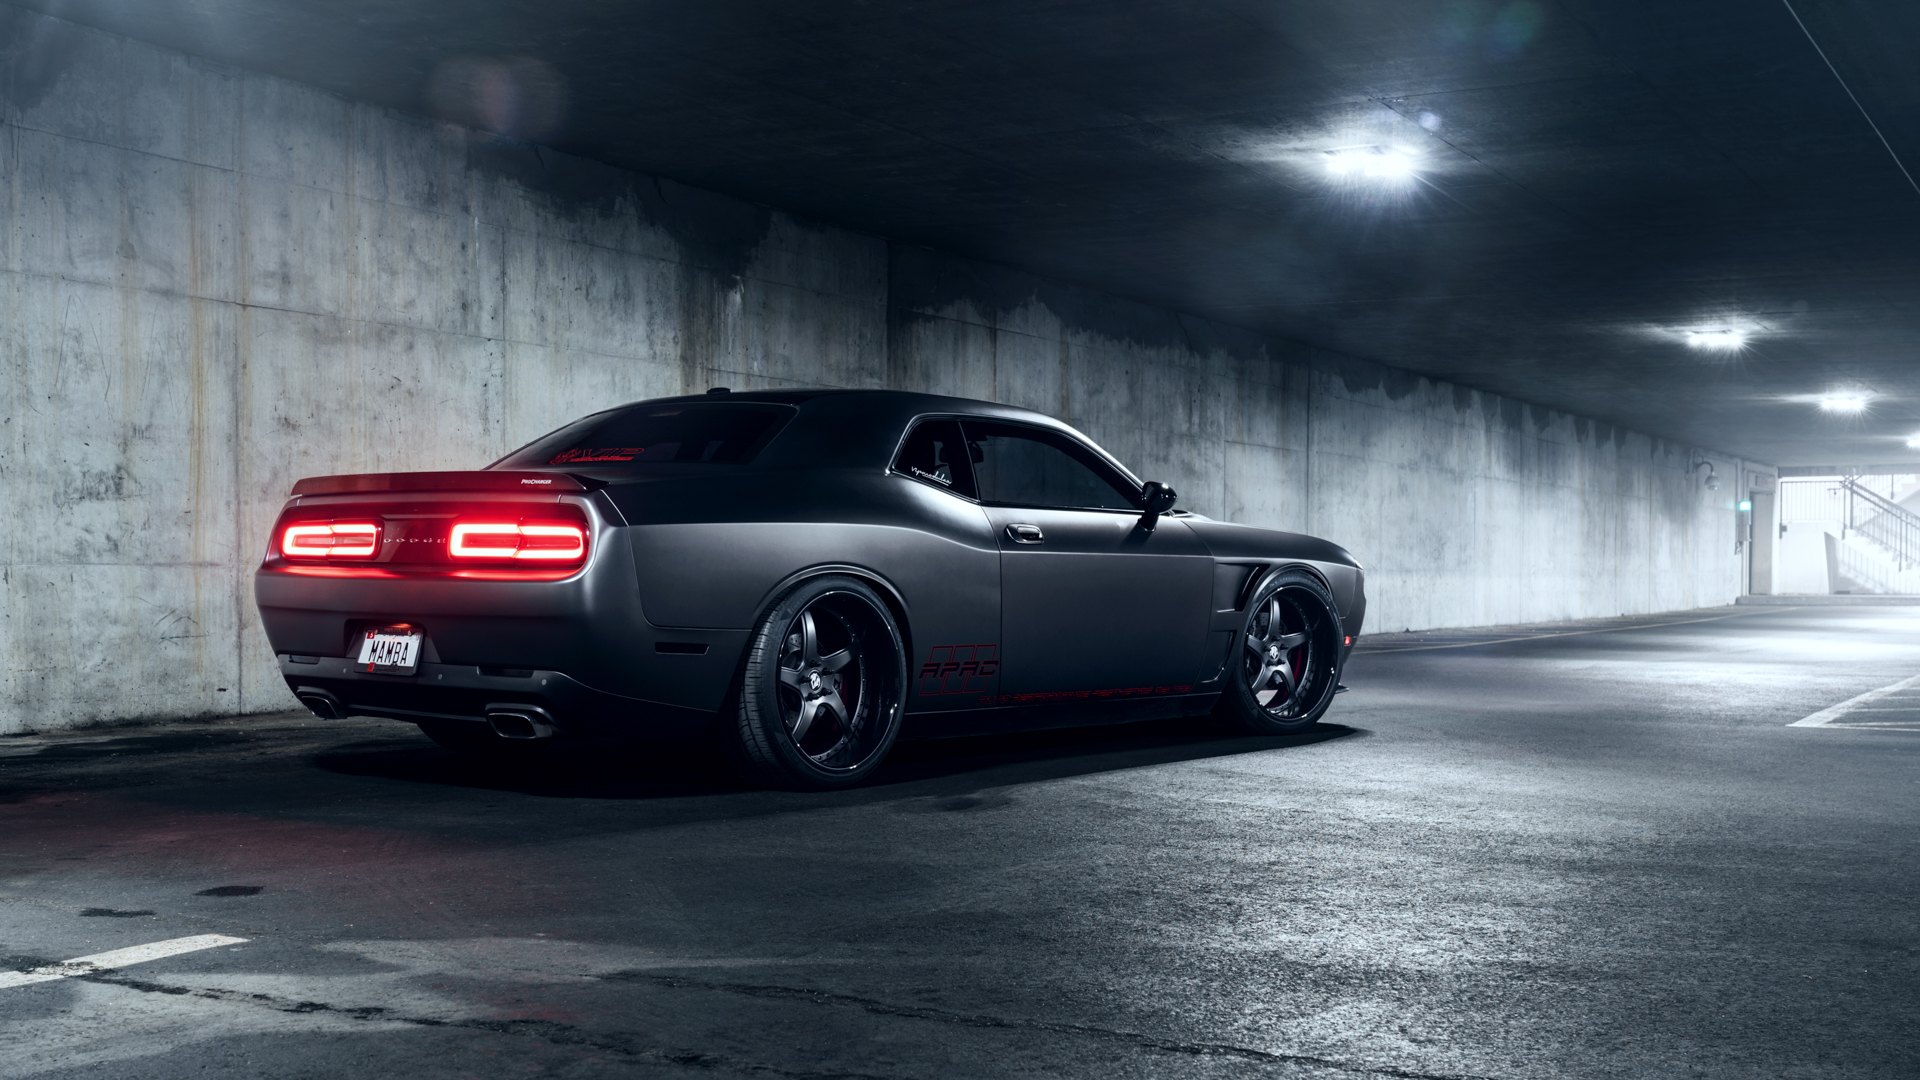 Factory Style Rear Spoiler on Matte Gray Dodge Challenger - Photo by Arlen Liverman